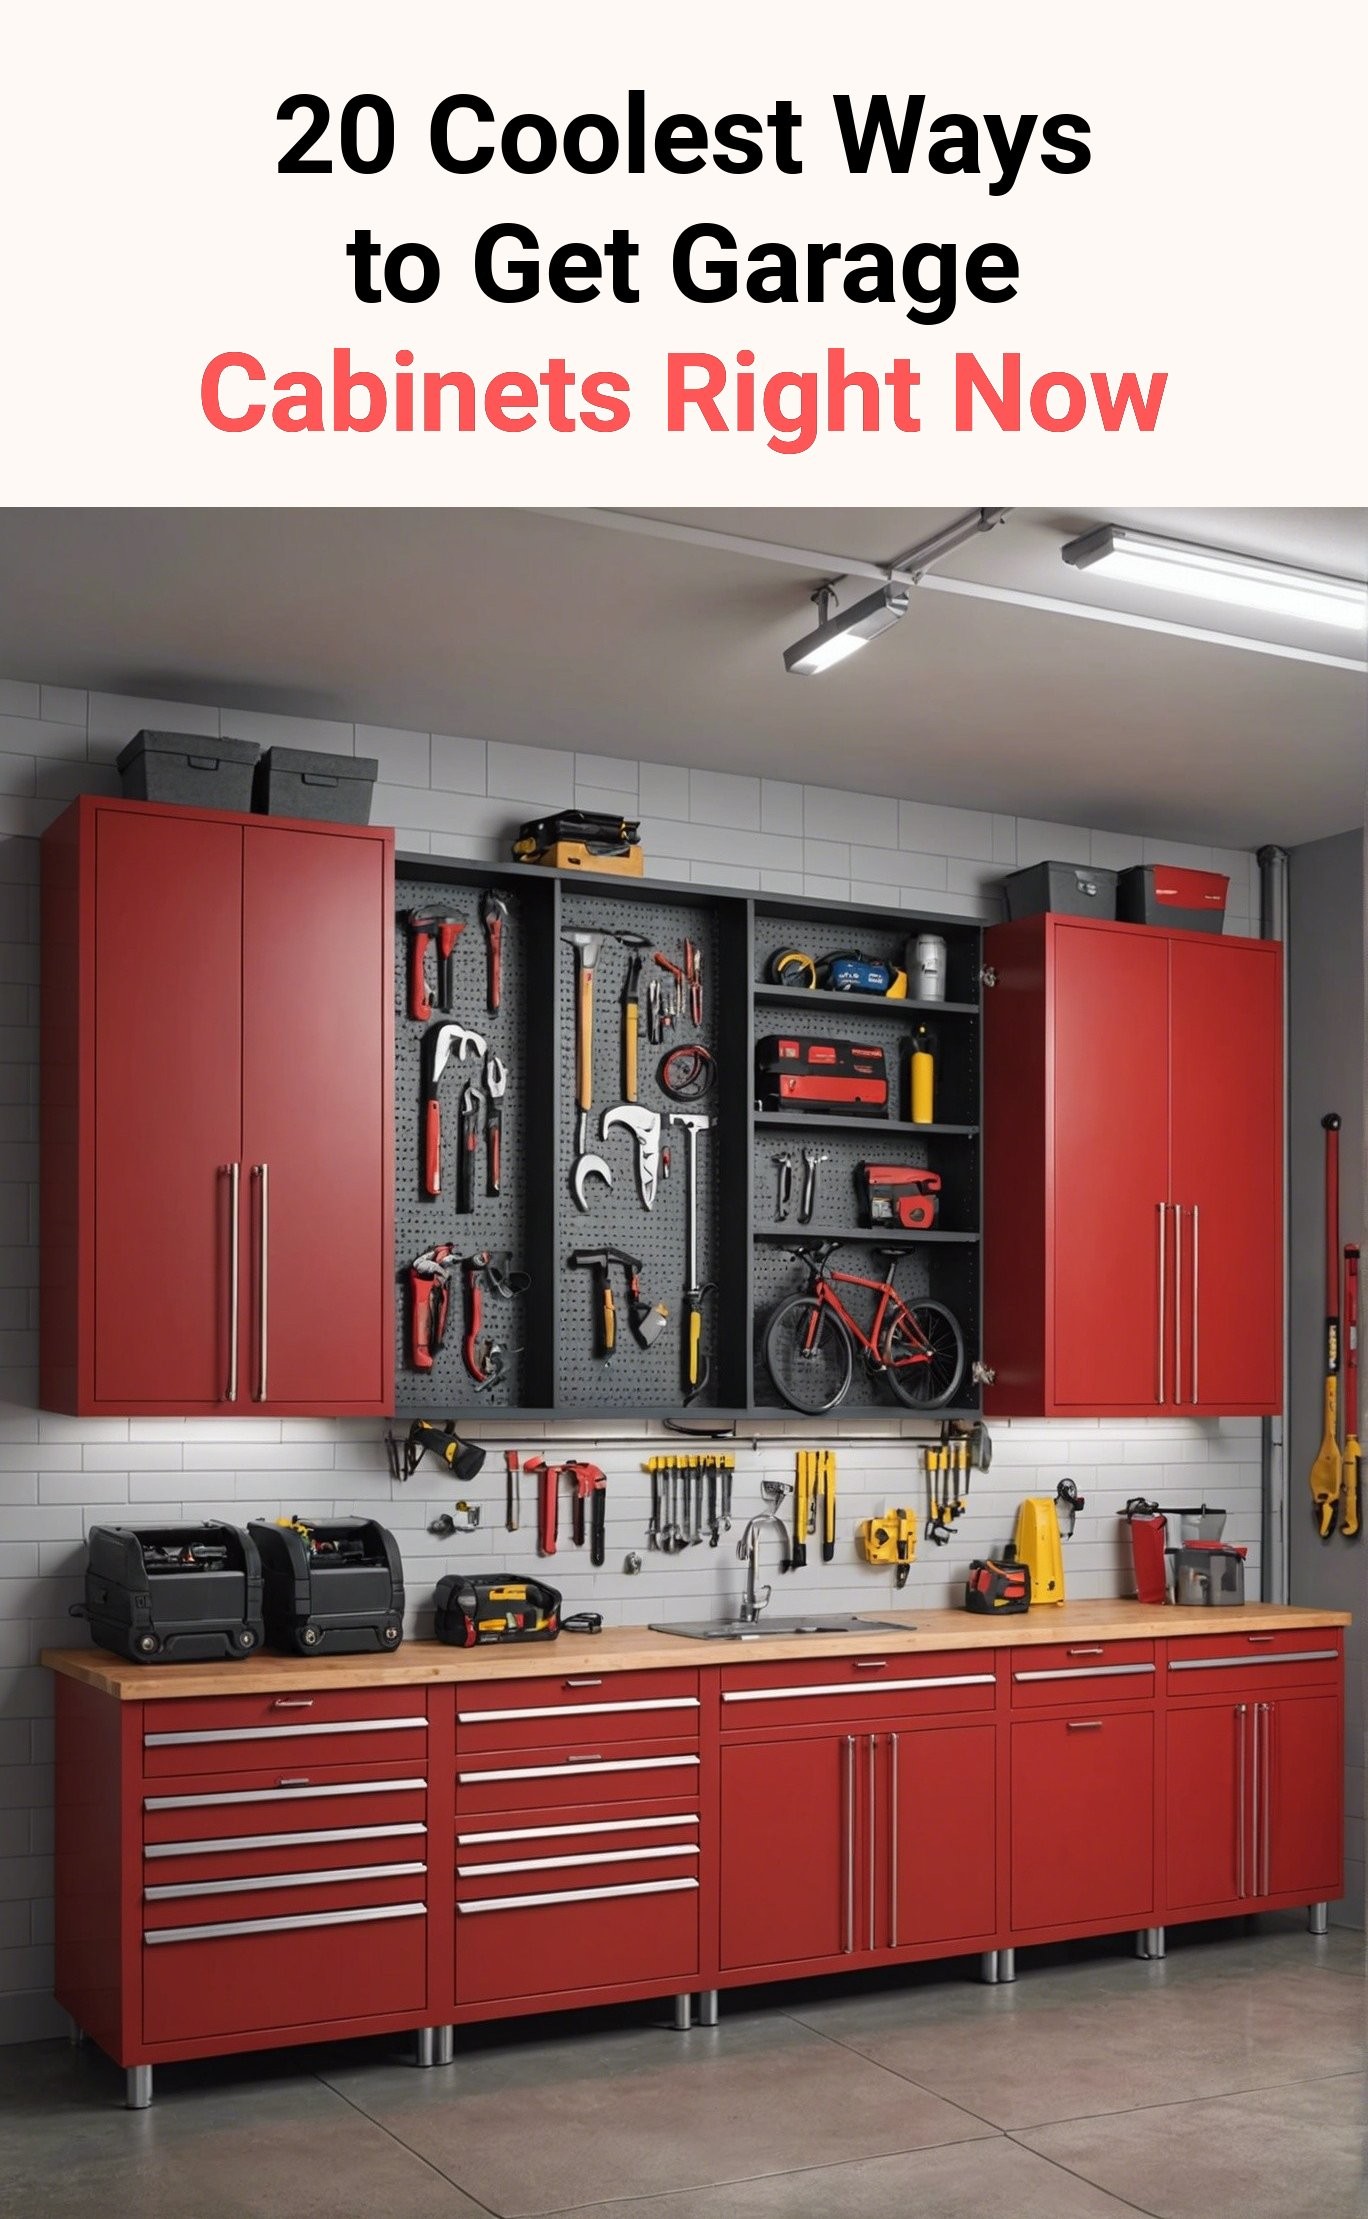 20 Coolest Ways to Get Garage Cabinets Right Now